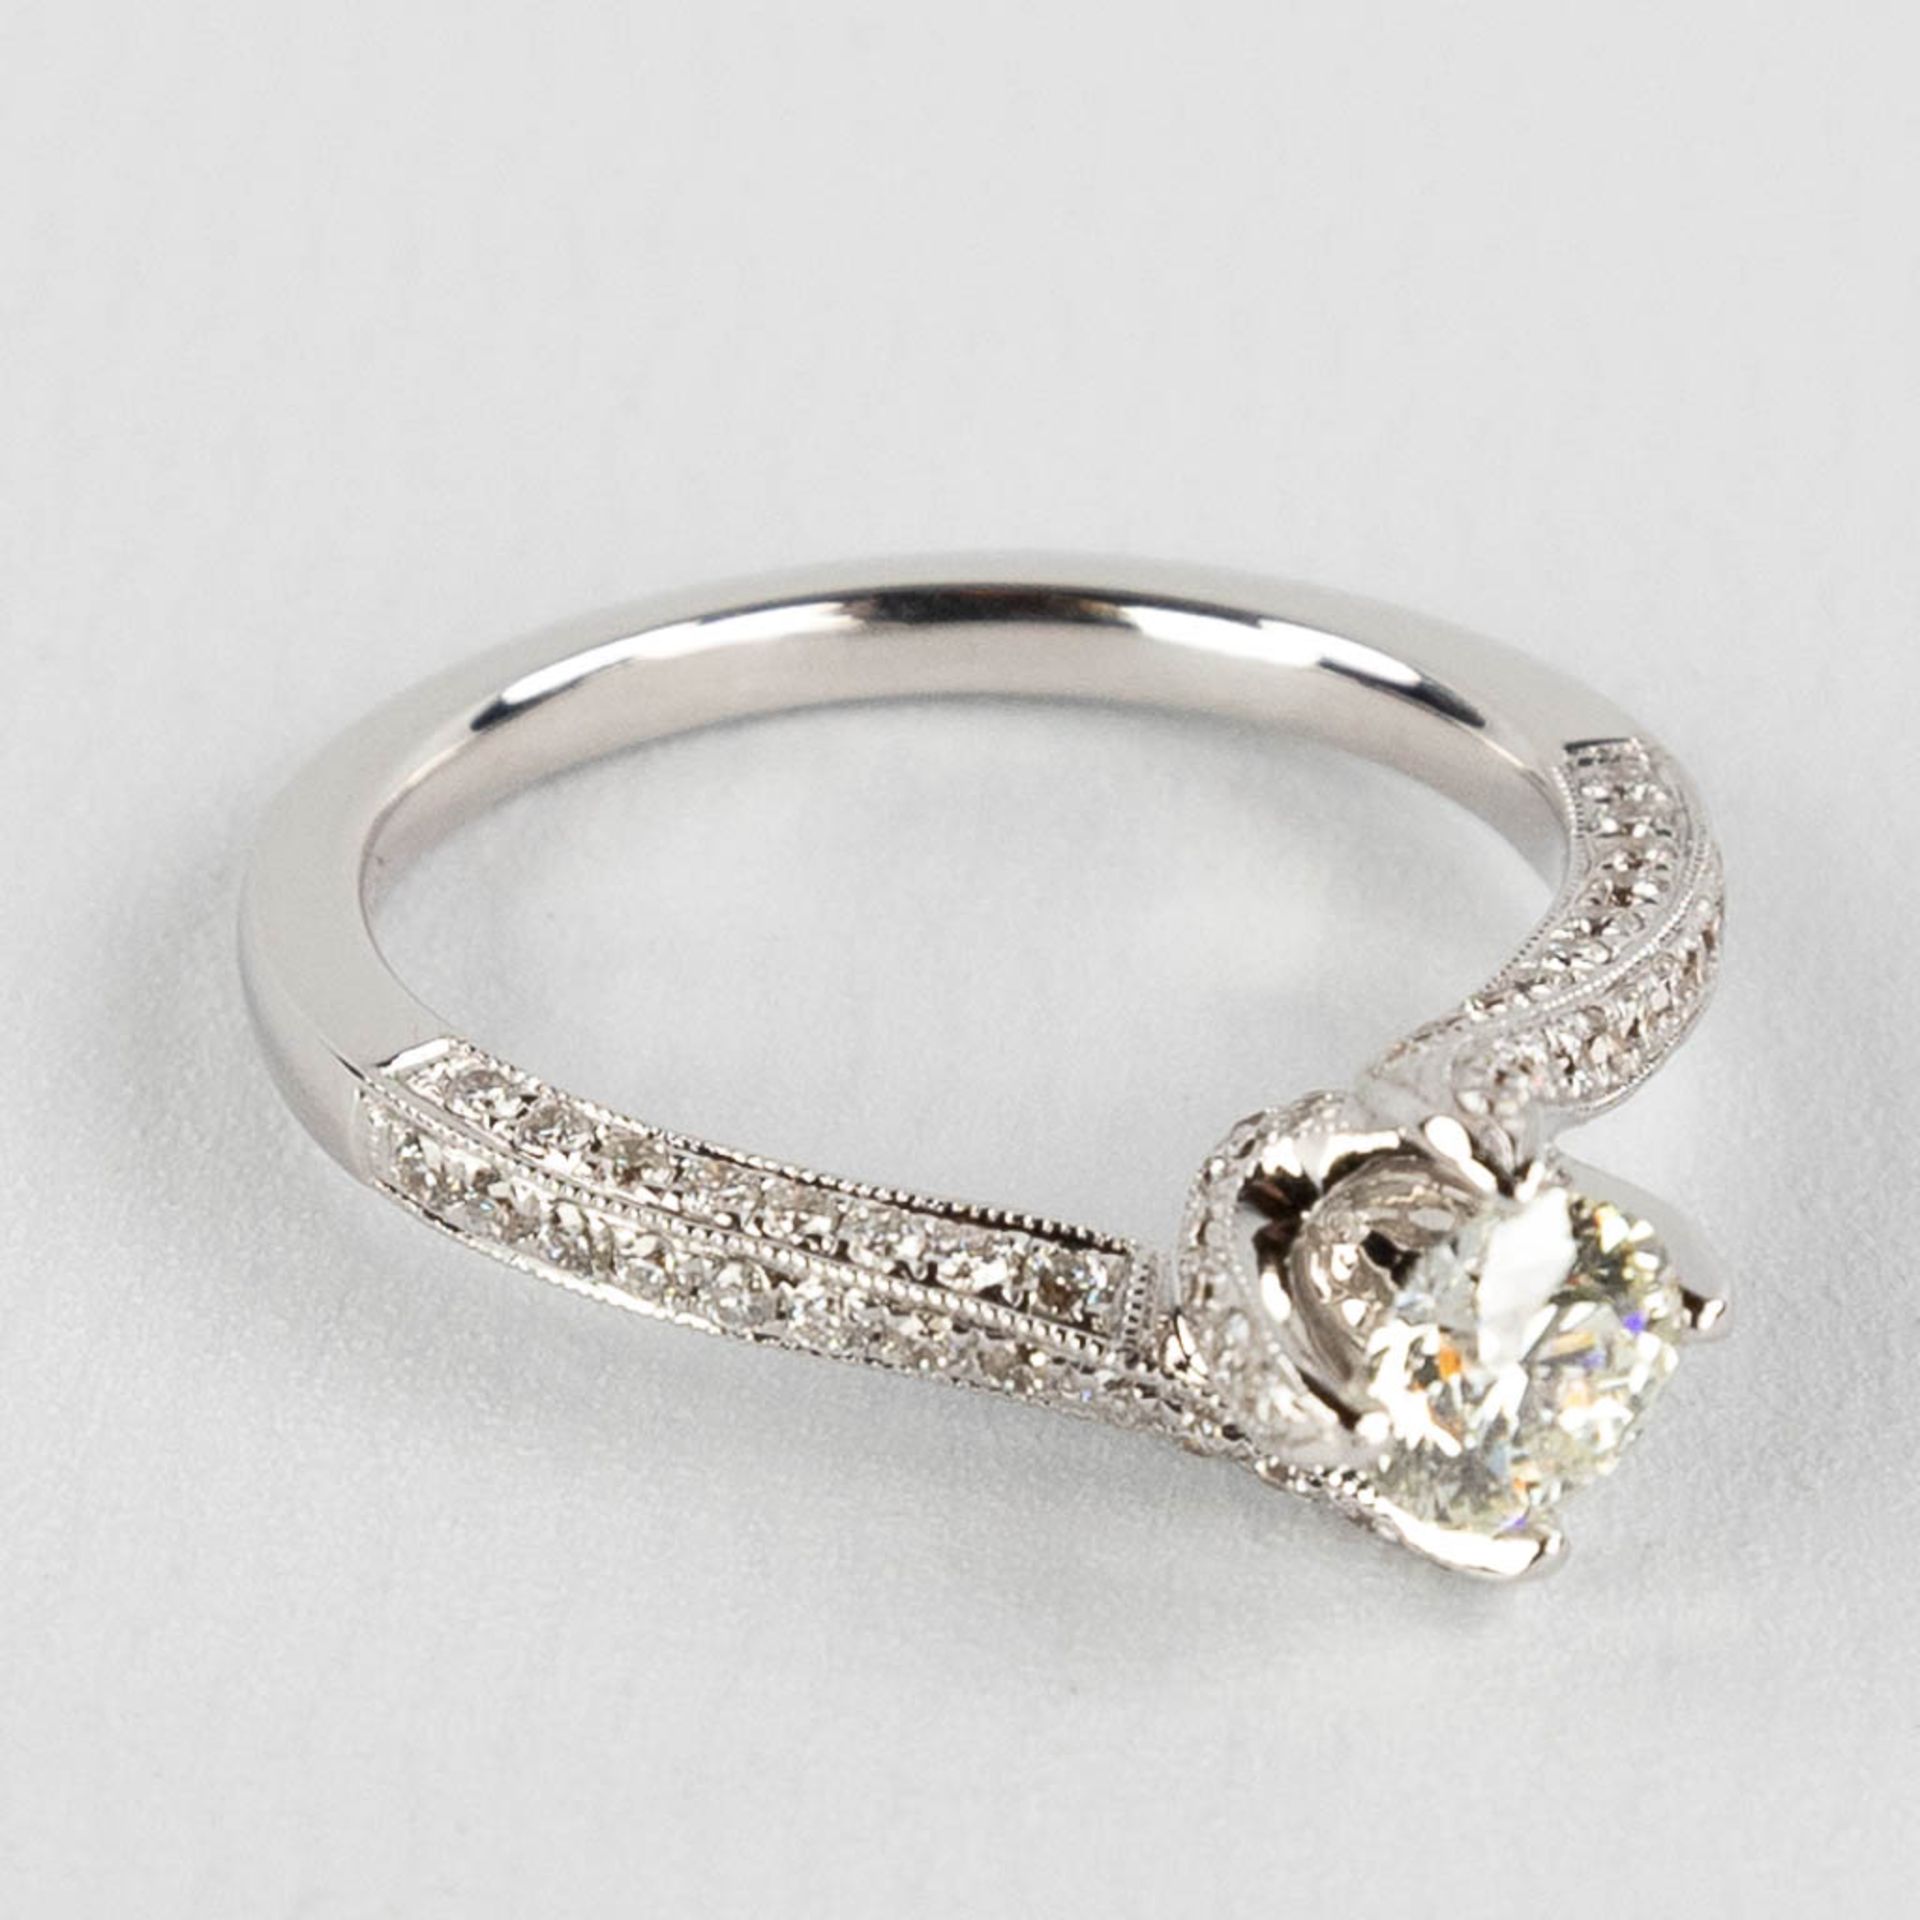 A ring, white gold with brilliant cut diamonds, central stone approximately 0,5ct, total appr. 0,53c - Image 3 of 10